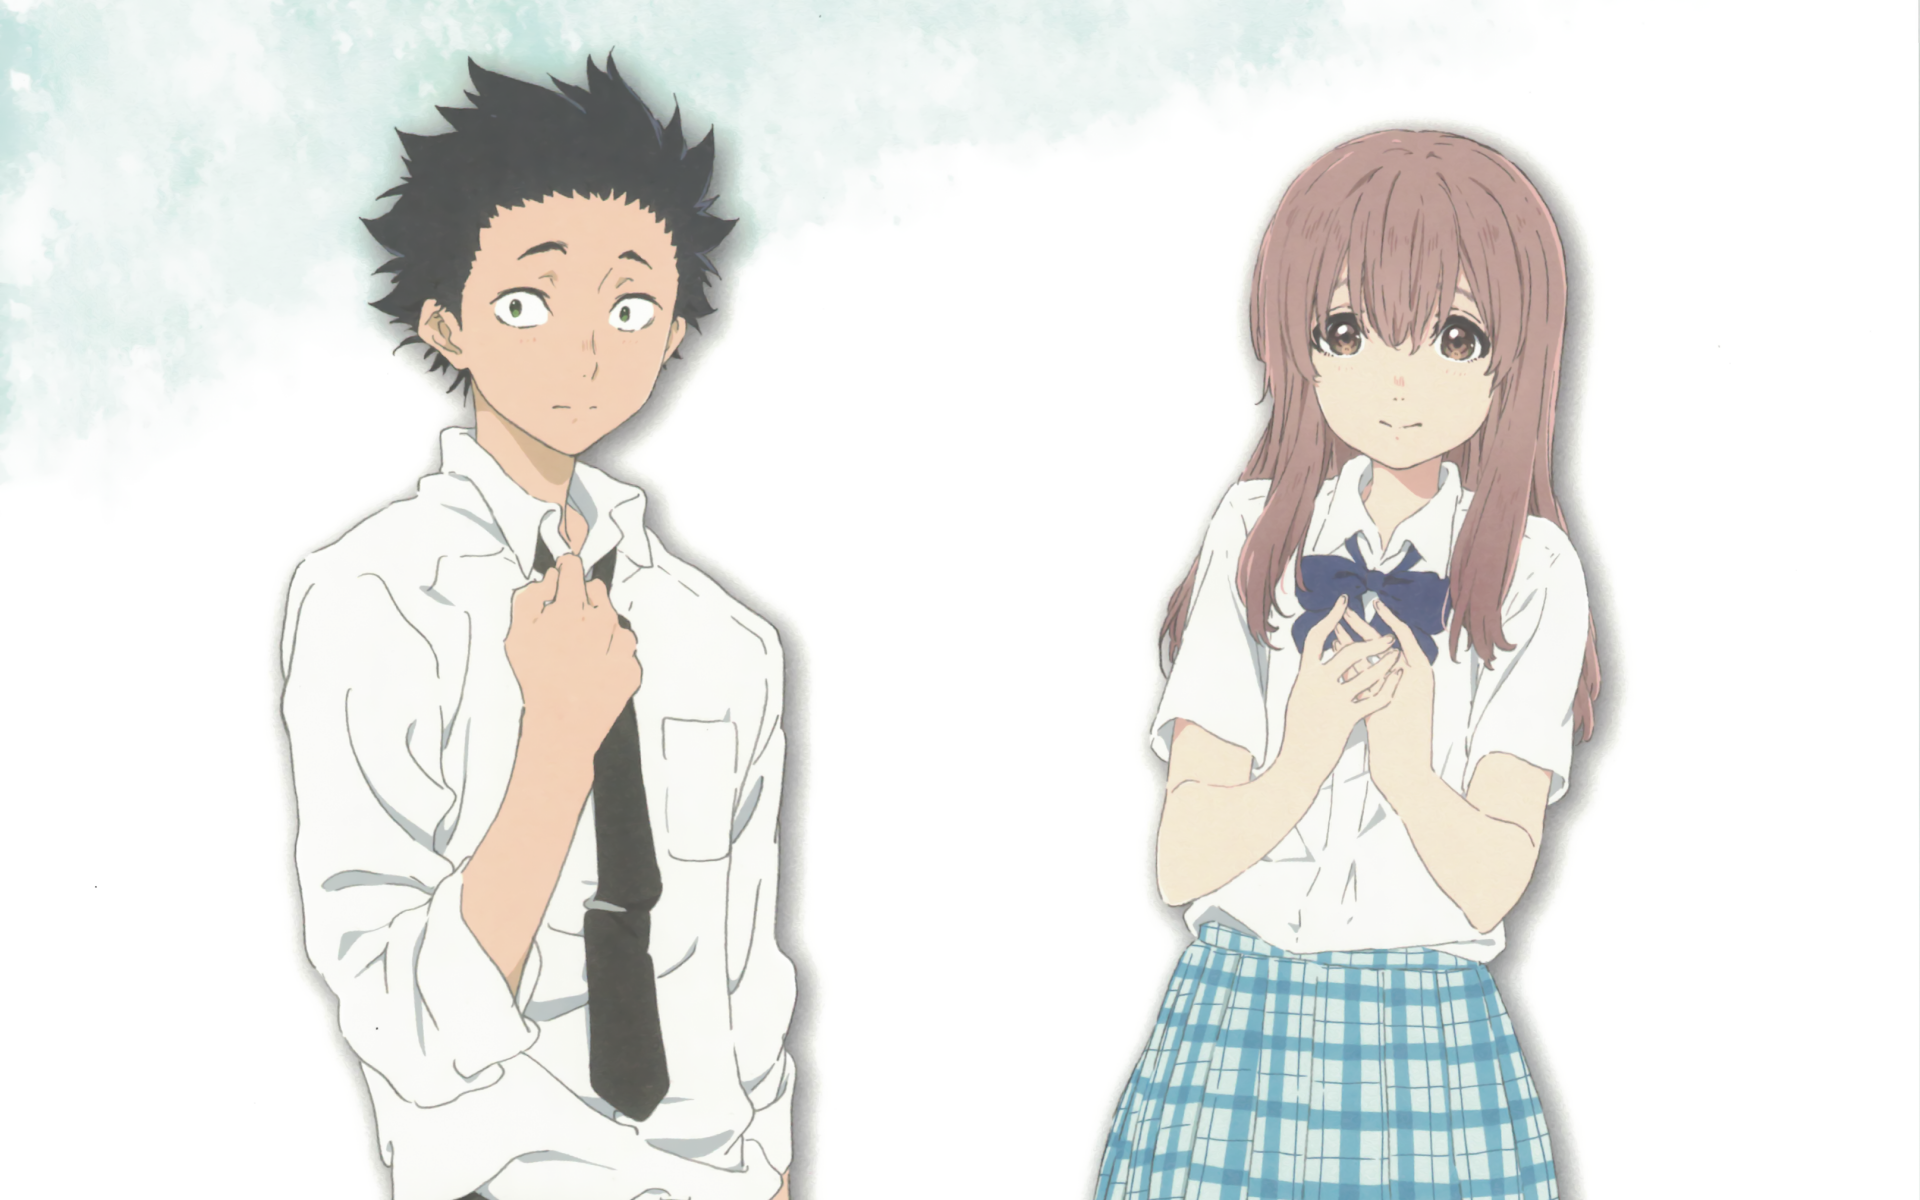 watch a silent voice english dub online free